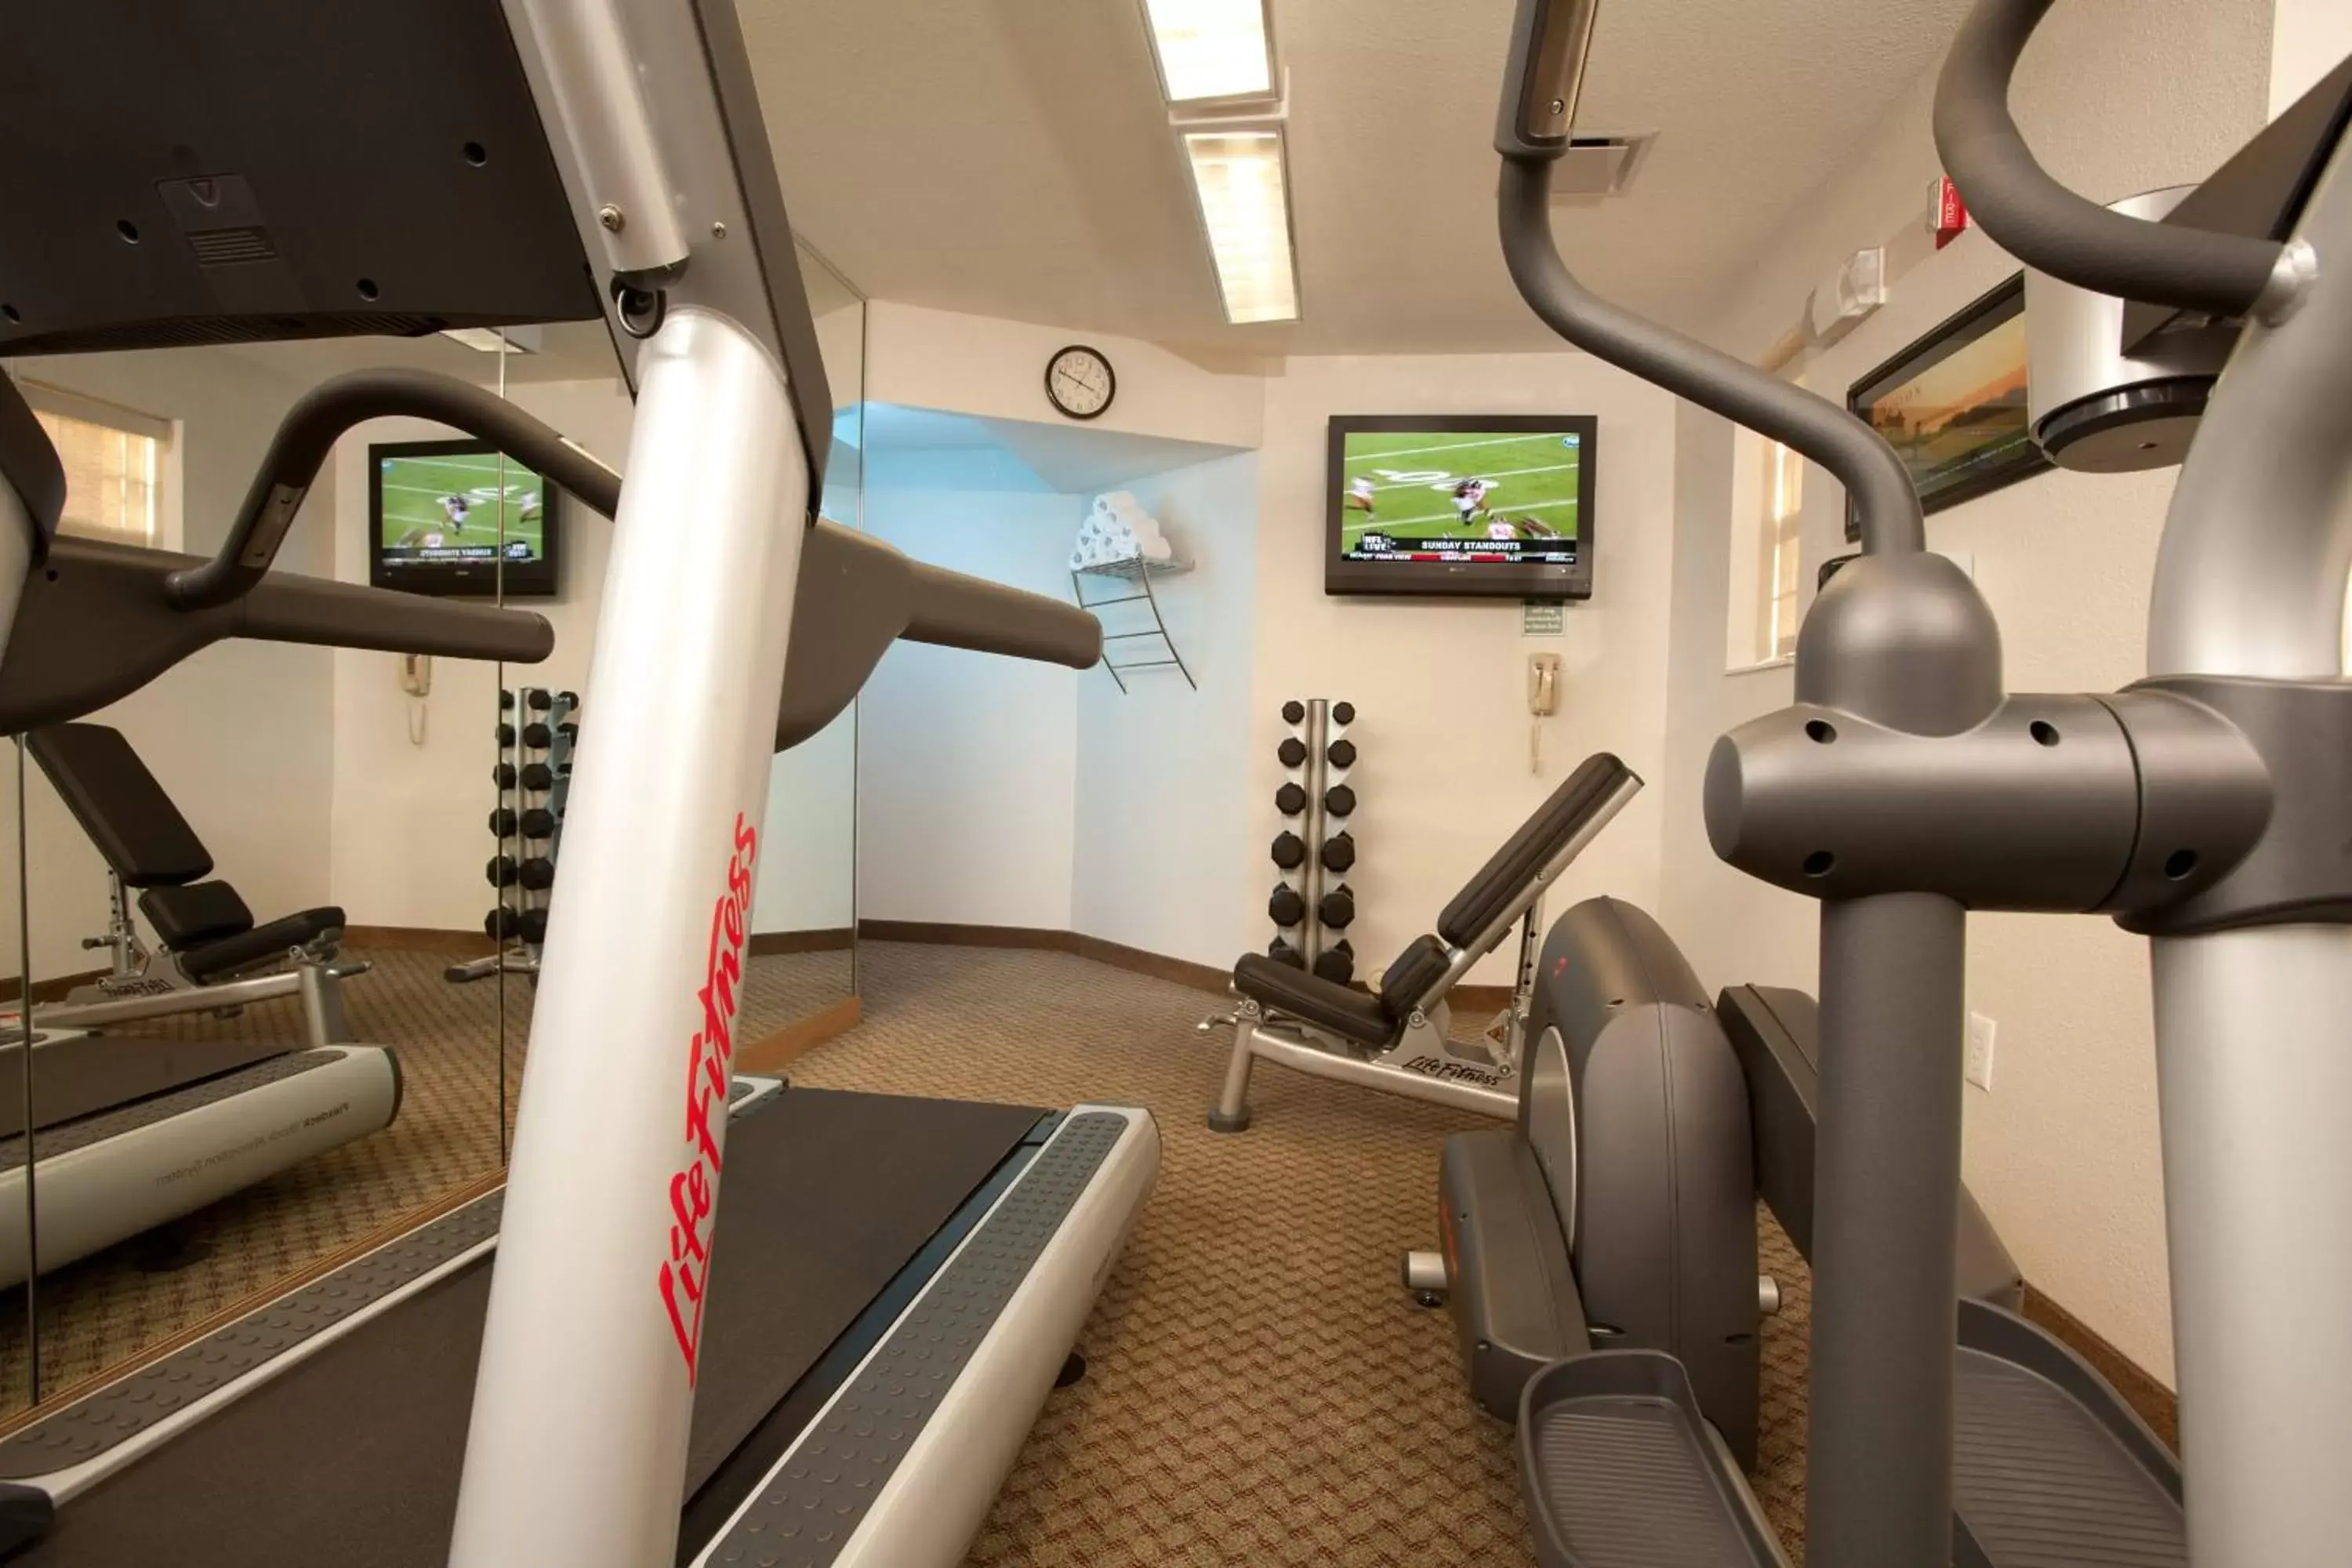 Fitness centre/facilities, Fitness Center/Facilities in TownePlace Suites by Marriott Fort Meade National Business Park